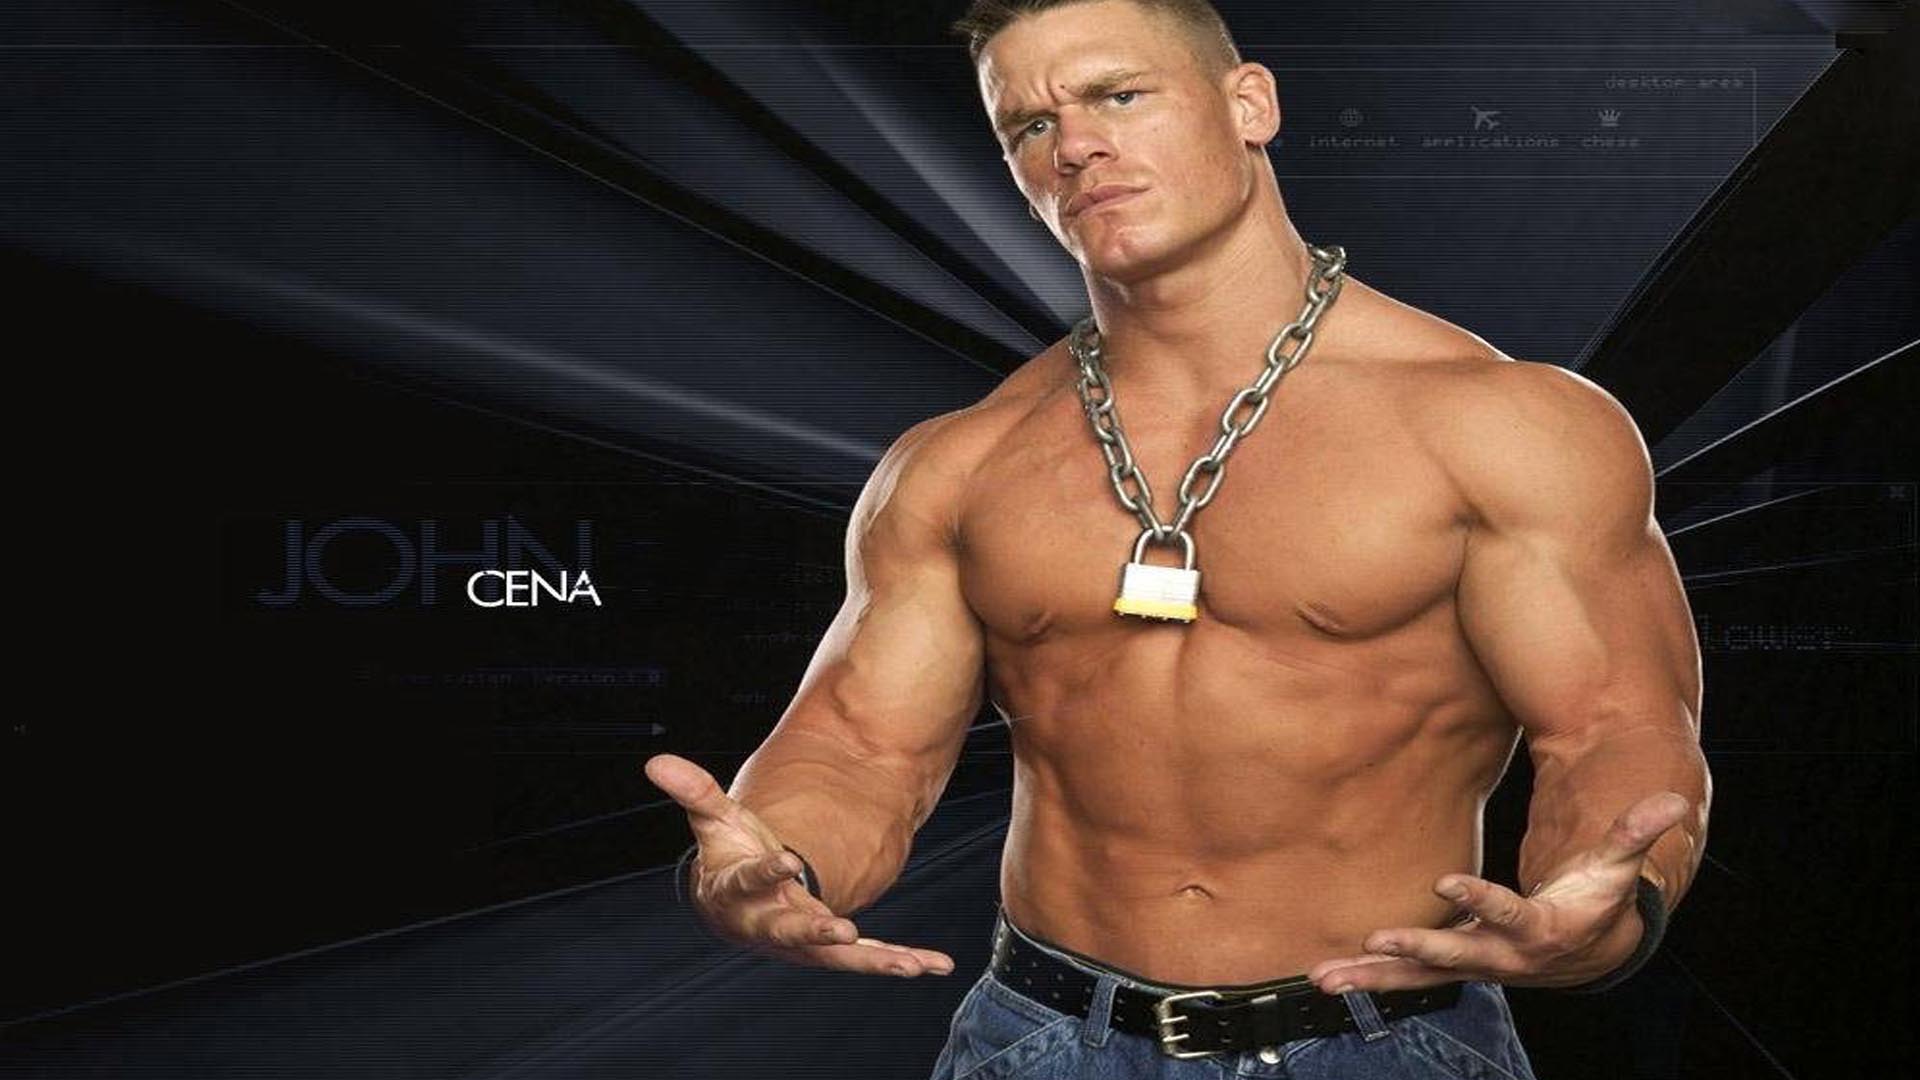 lovely john cena body computer download free hd pictures